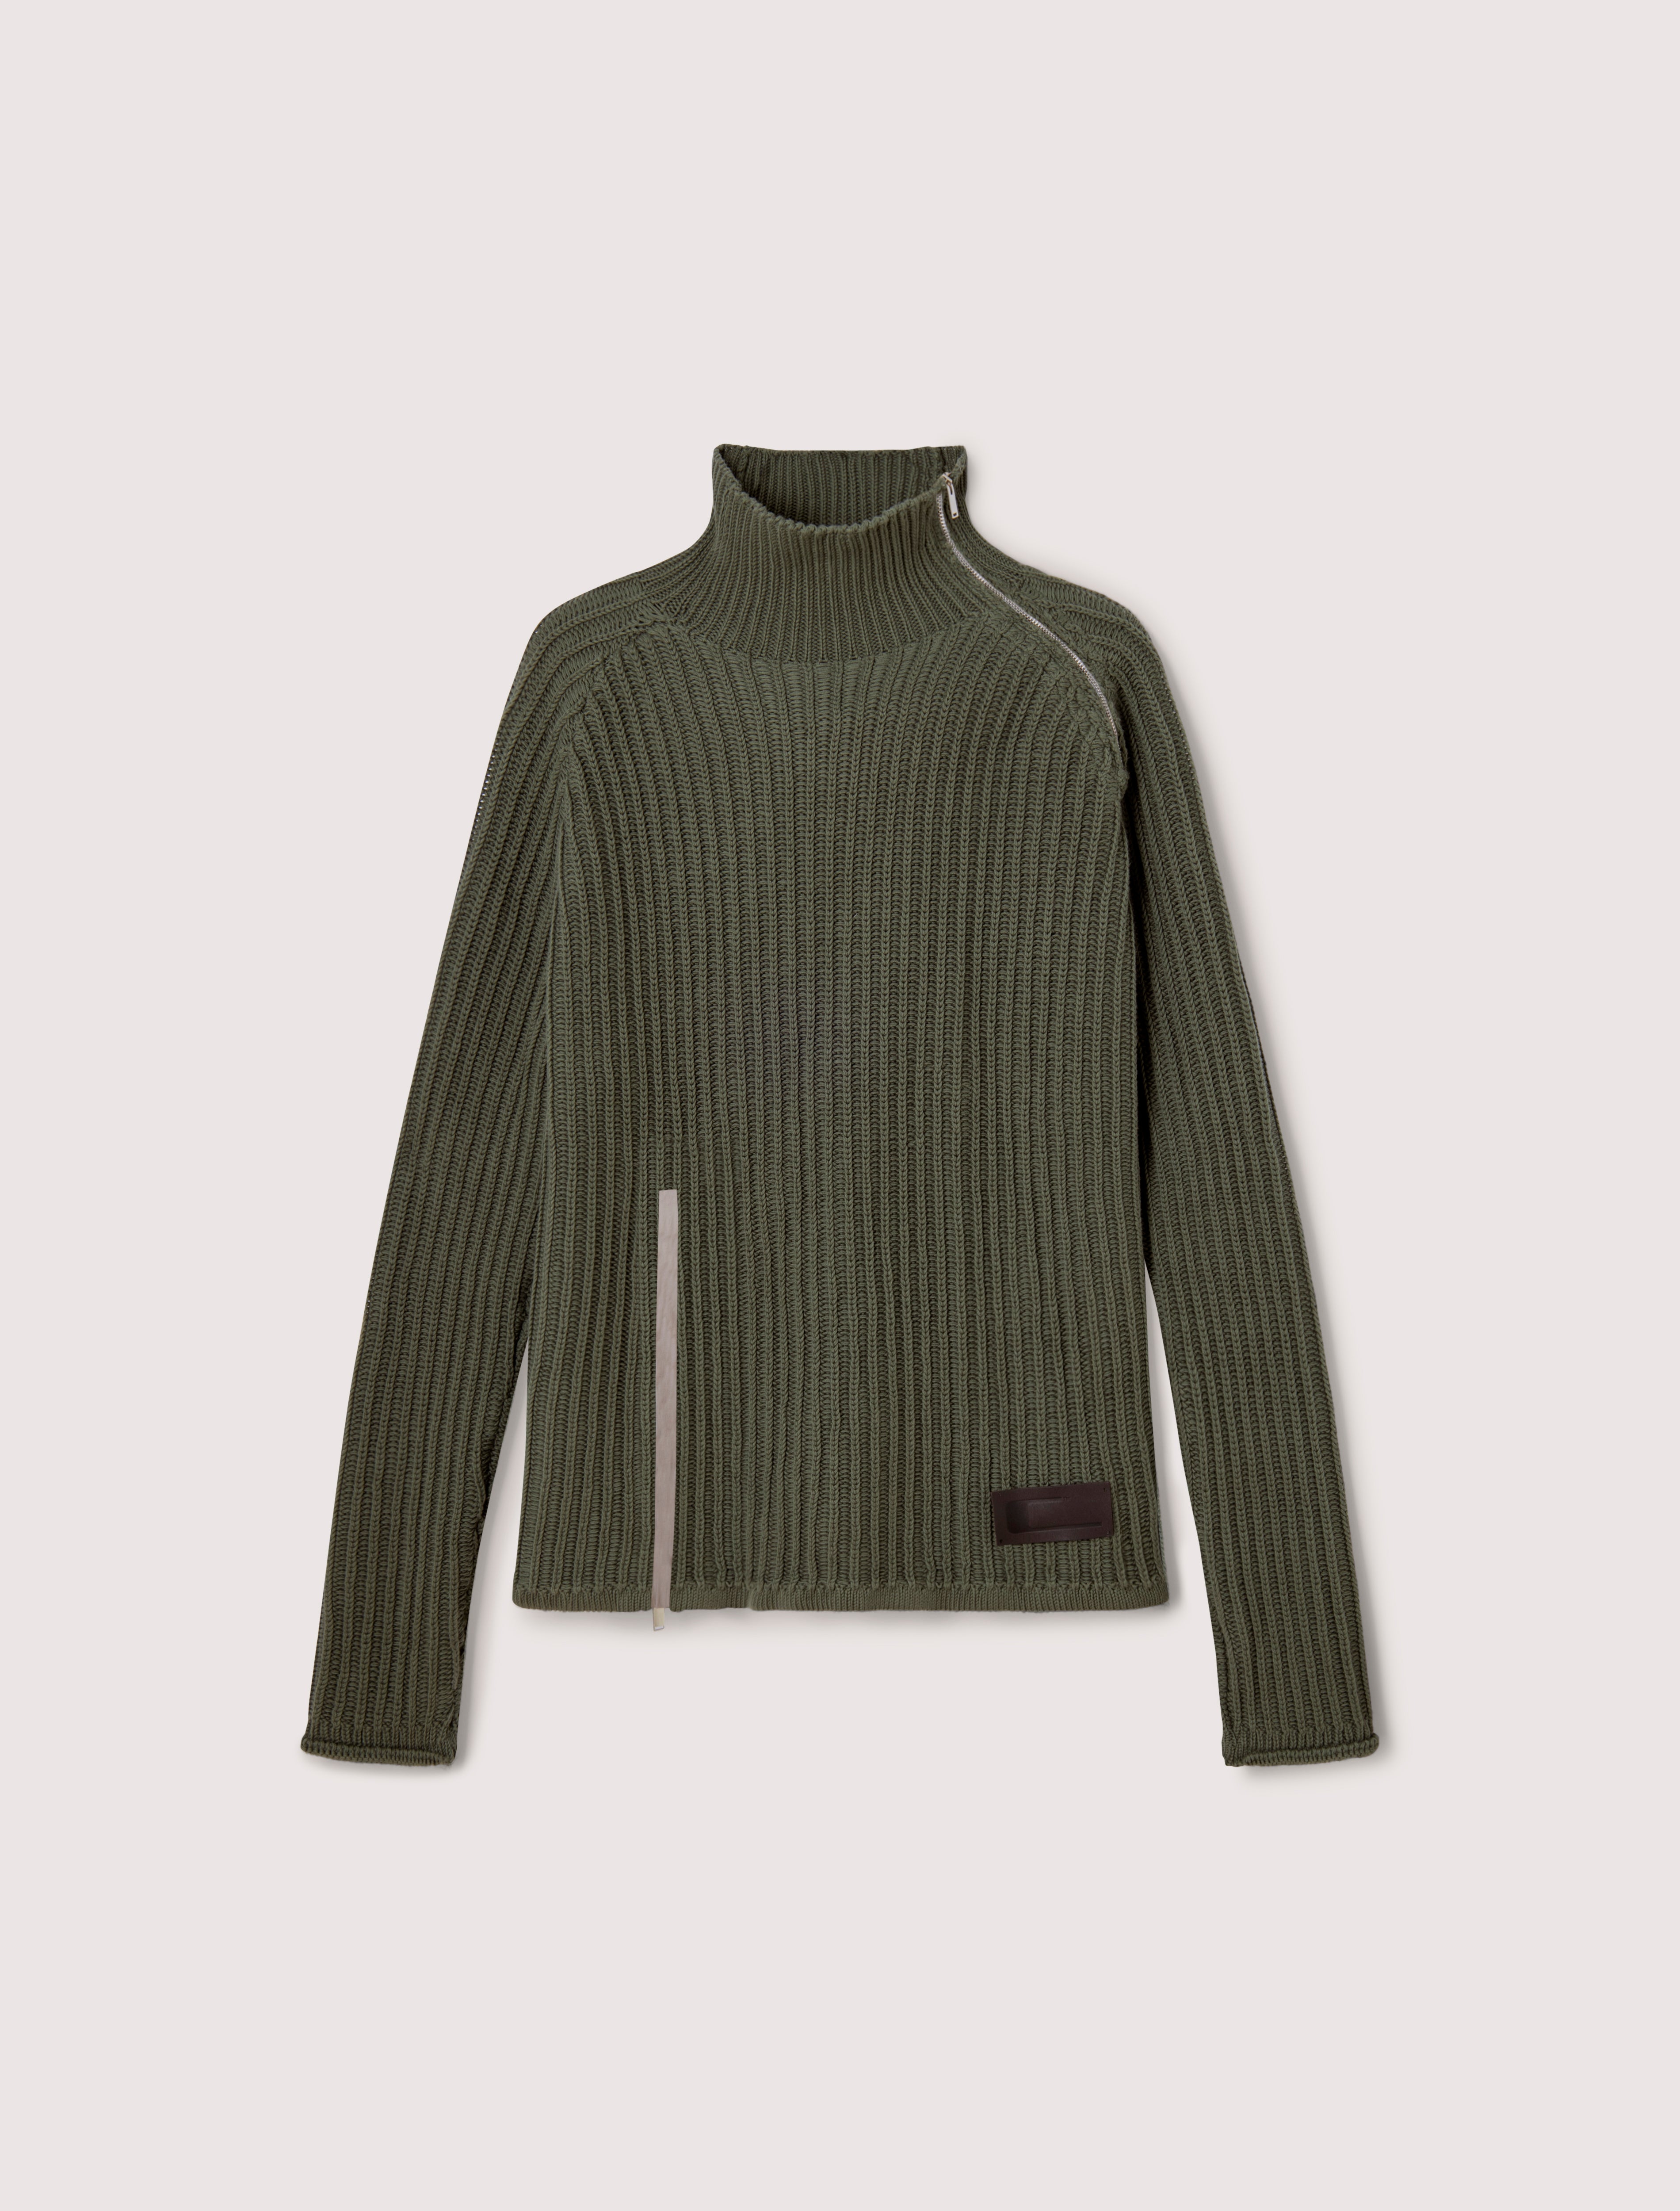 CARRER_REC KNITTED ZIP UP IN GREEN